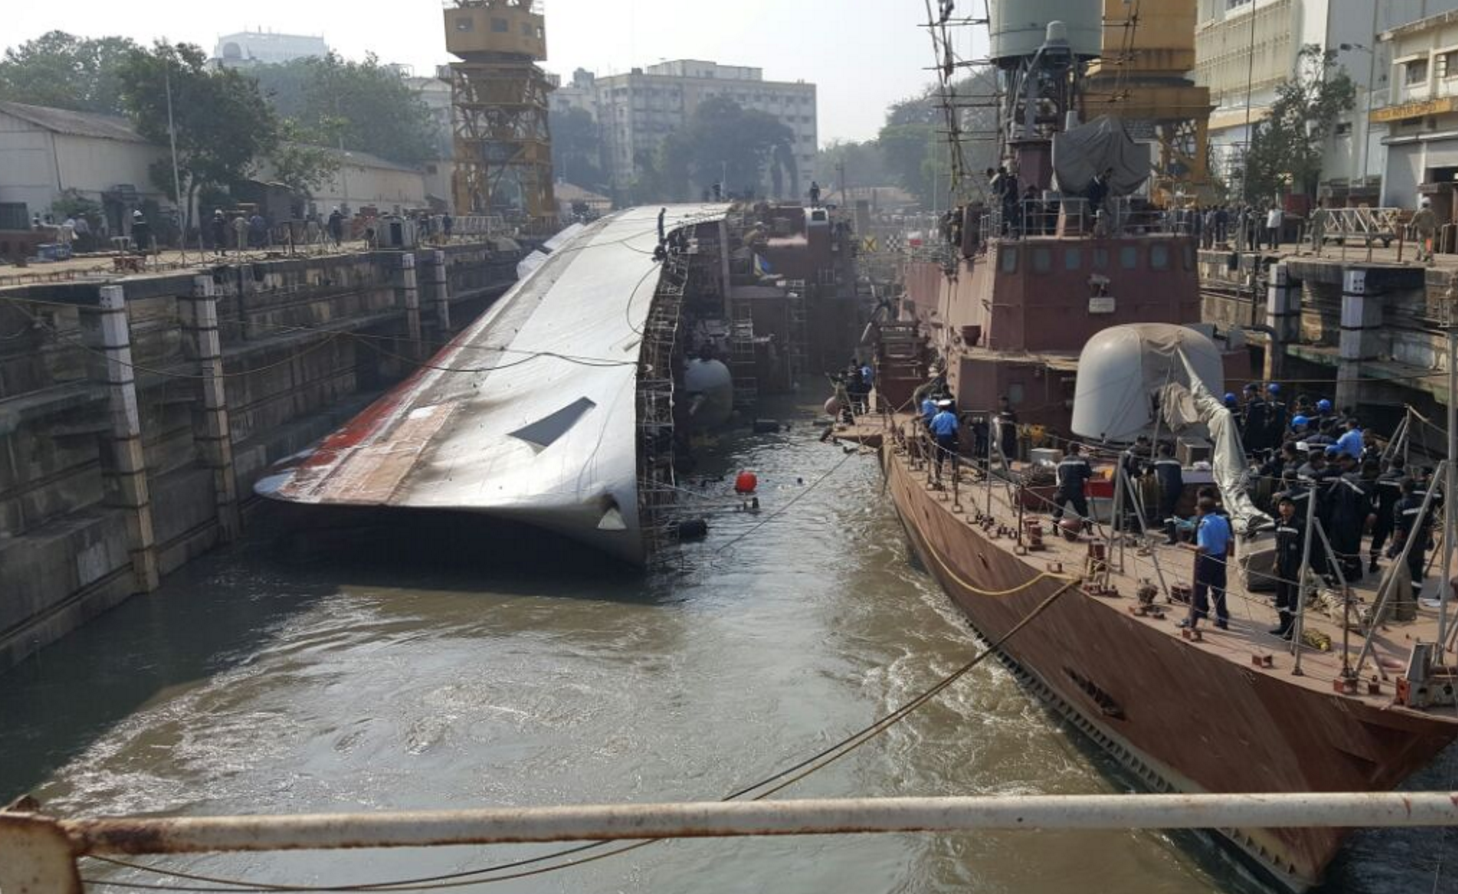 INS Betwa after the accident in Mumbai's naval dockyard